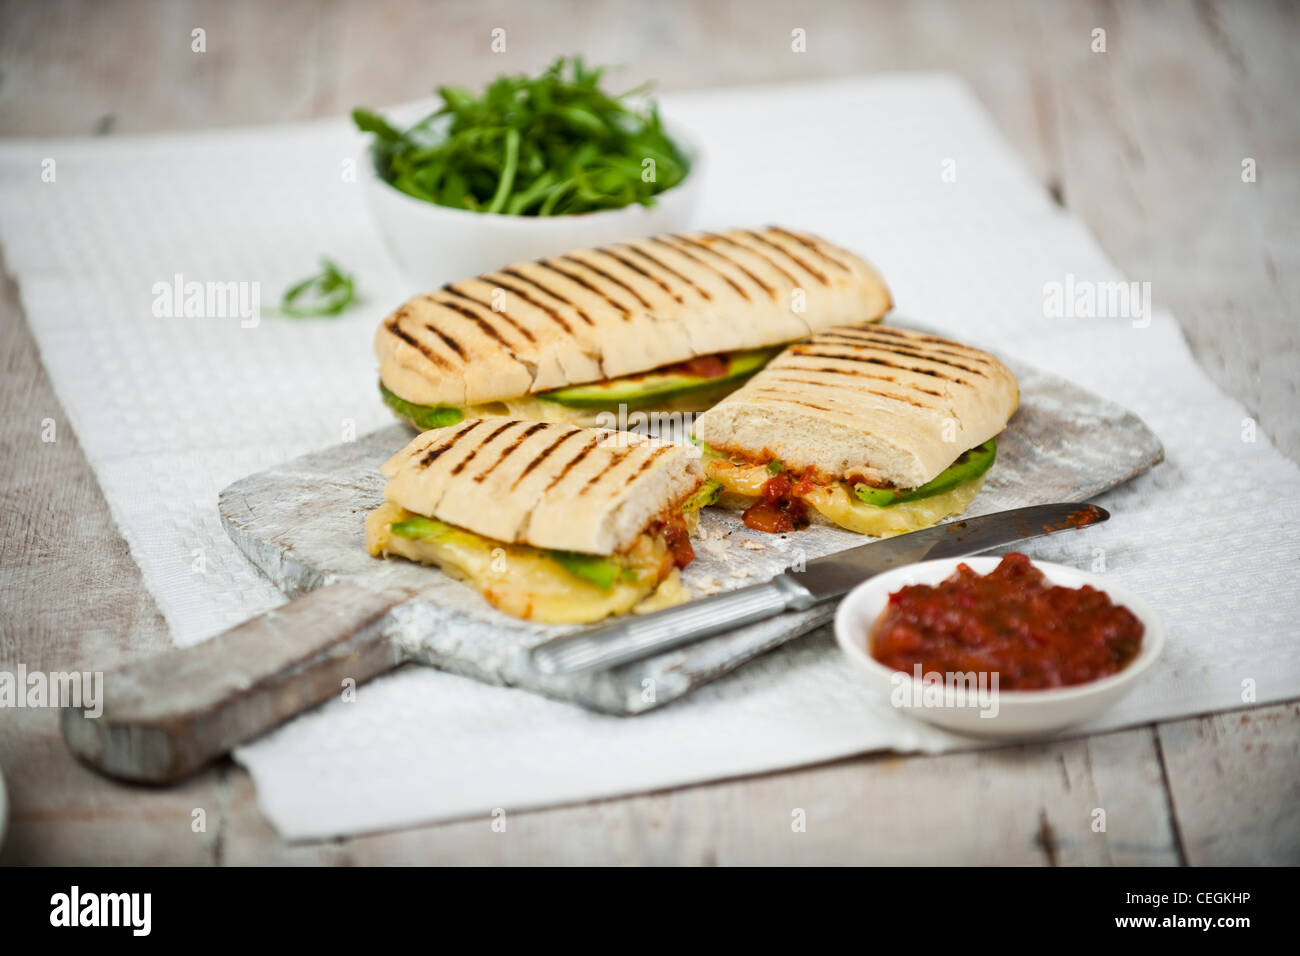 Panini Fromage & Avocado Banque D'Images